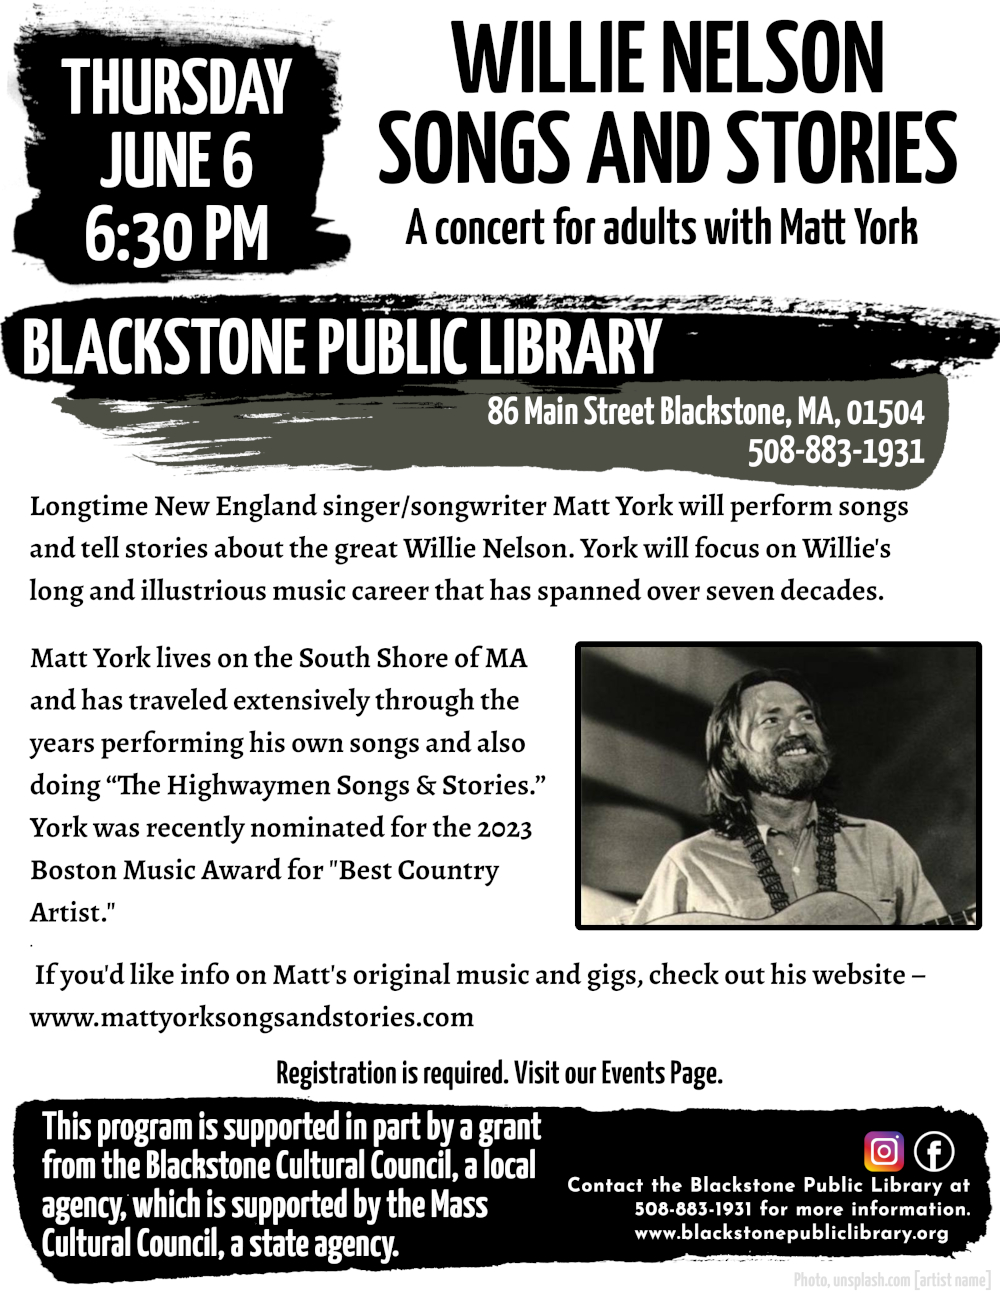 Willie Nelson – Songs and Stories A concert for adults with Matt York.  Thursday, June 6, 6:30 PM  Longtime New England singer/songwriter Matt York will perform songs and tell stories about the great Willie Nelson. York will focus on Willie's long and illustrious music career that has spanned over seven decades.   Matt York lives on the South Shore of MA and has traveled extensively through the years performing his own songs and also doing “The Highwaymen Songs & Stories.” York was recently nominated for the 2023 Boston Music Award for "Best Country Artist."  If you'd like info on Matt's original music and gigs, check out his website – www.mattyorksongsandstories.com   Registration is required. Visit our Events Page. Contact the Blackstone Public Library at 508-883-1931 for more information.  This program is supported in part by a grant from the Blackstone Cultural Council, a local agency, which is supported by the Mass Cultural Council, a state agency.